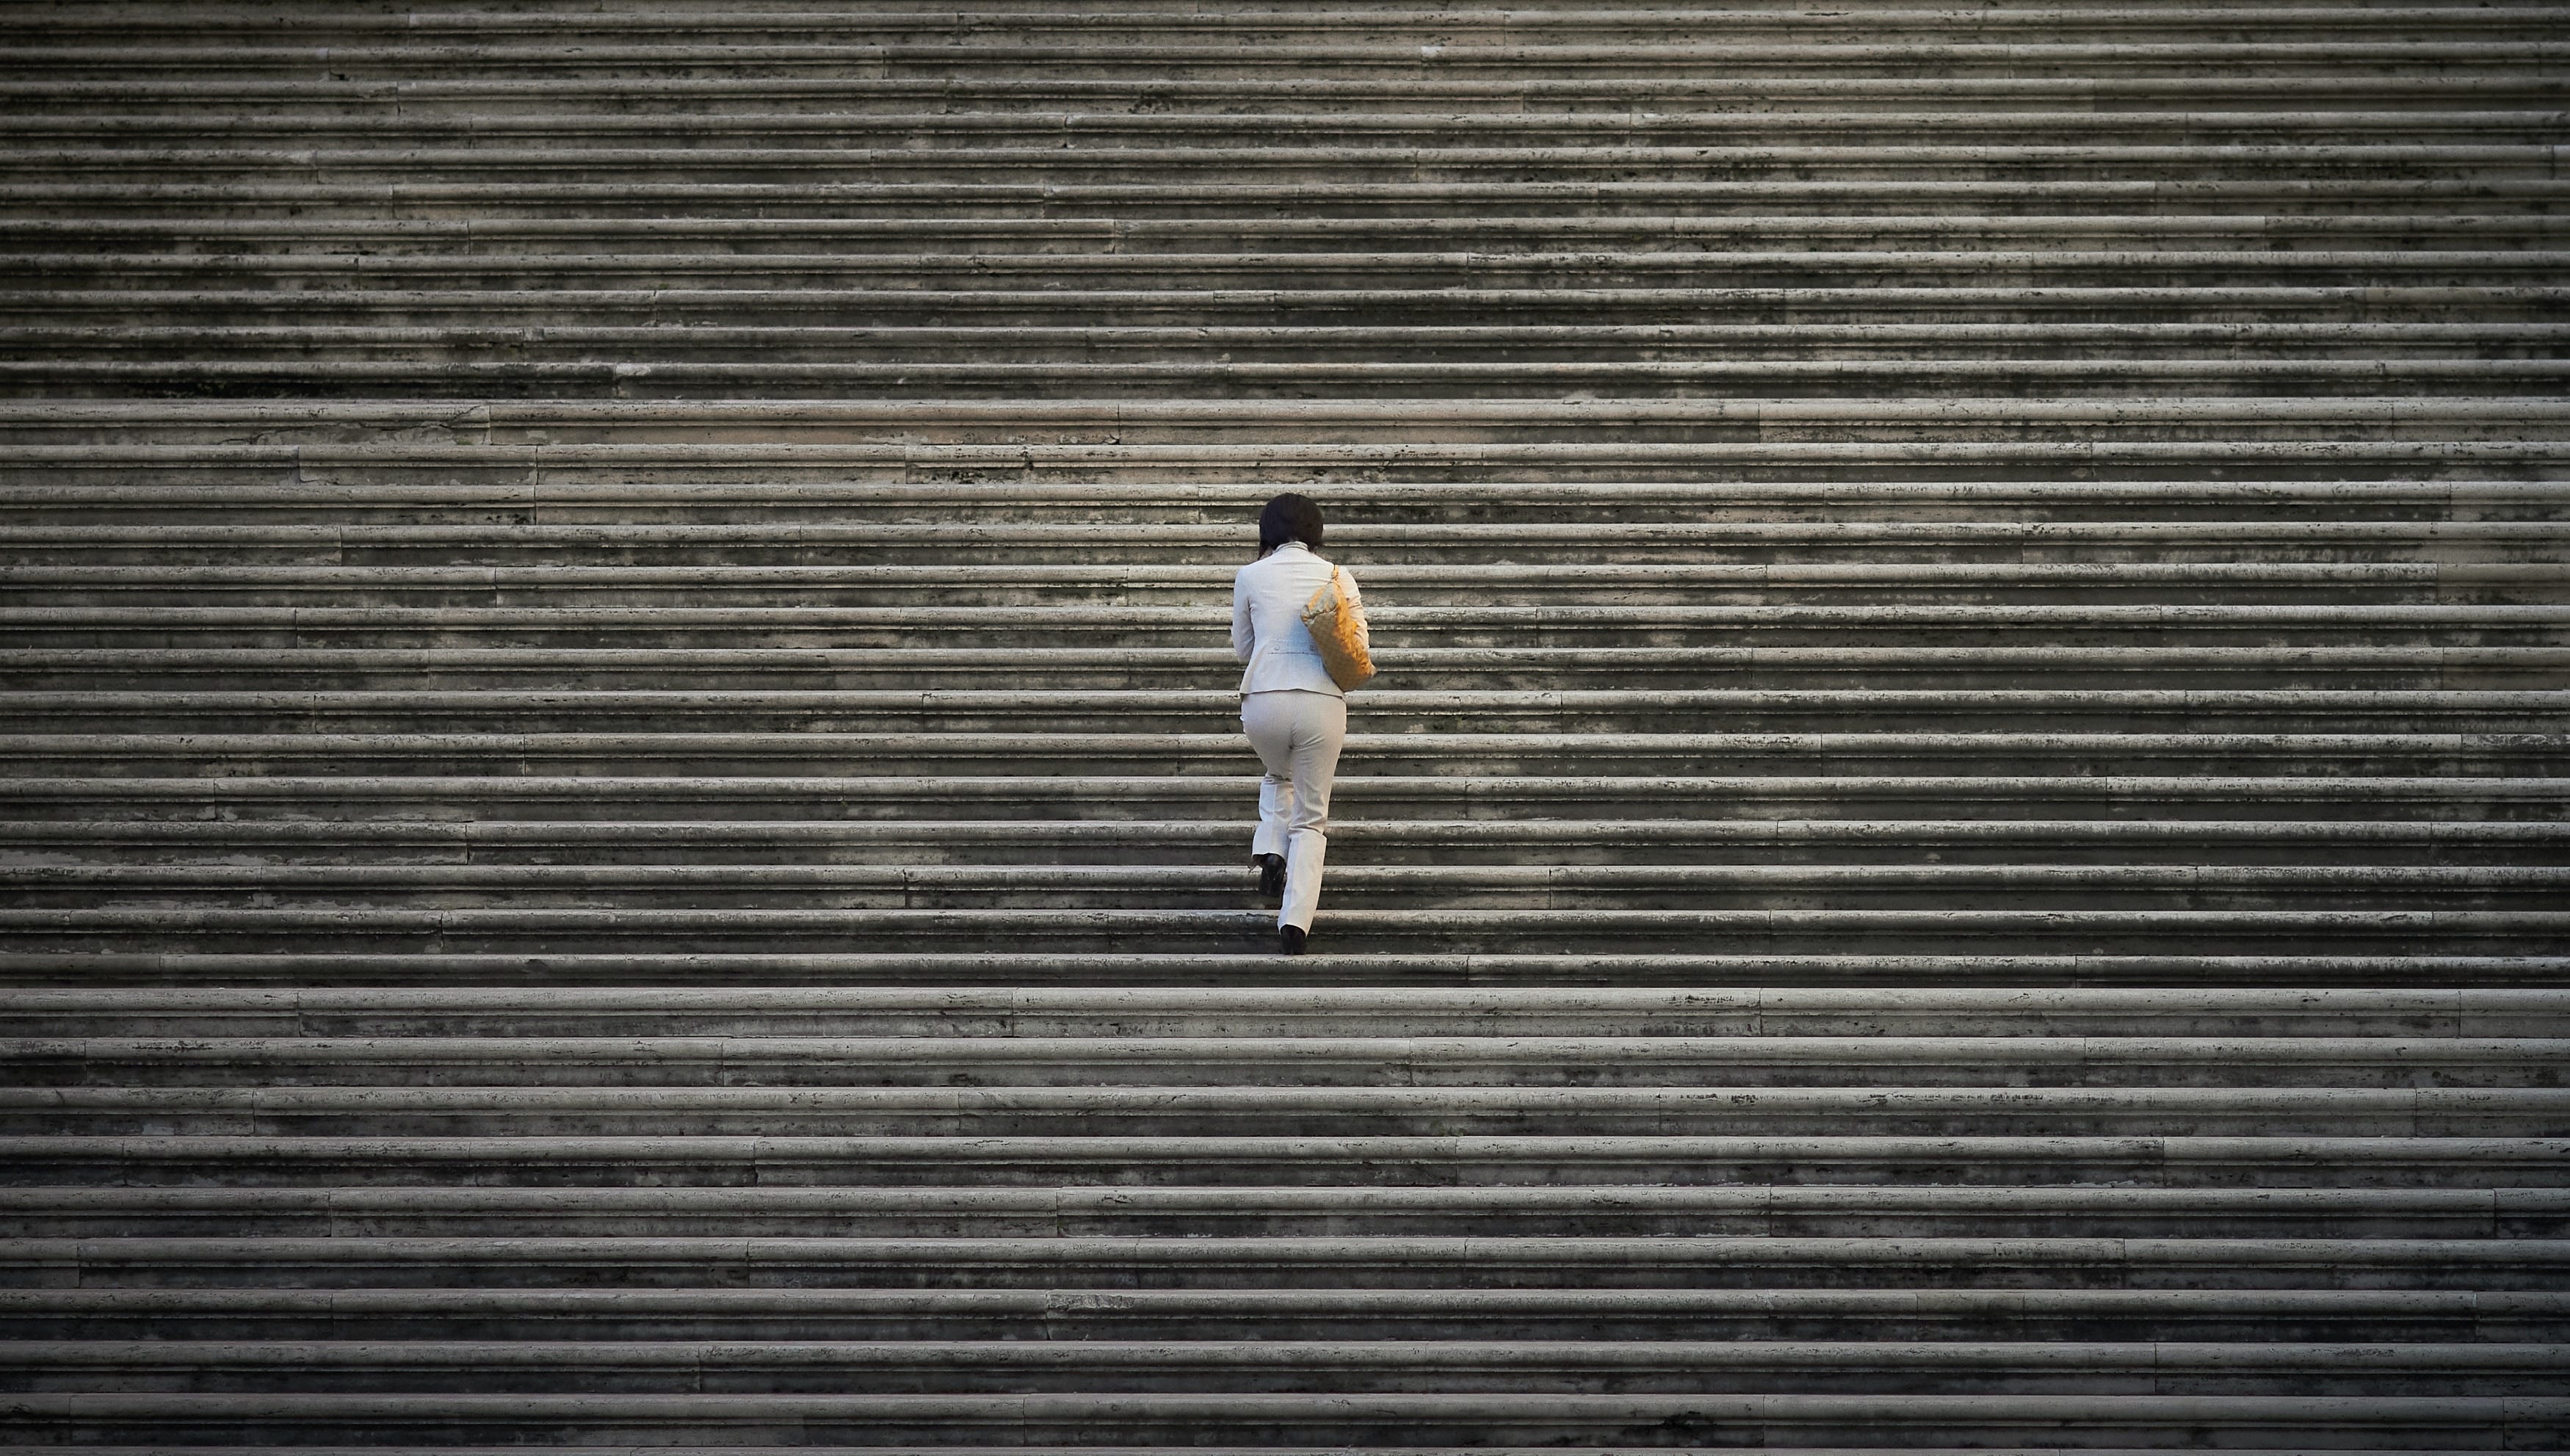 Embrace the climb! How stairs can super-charge your fitness in